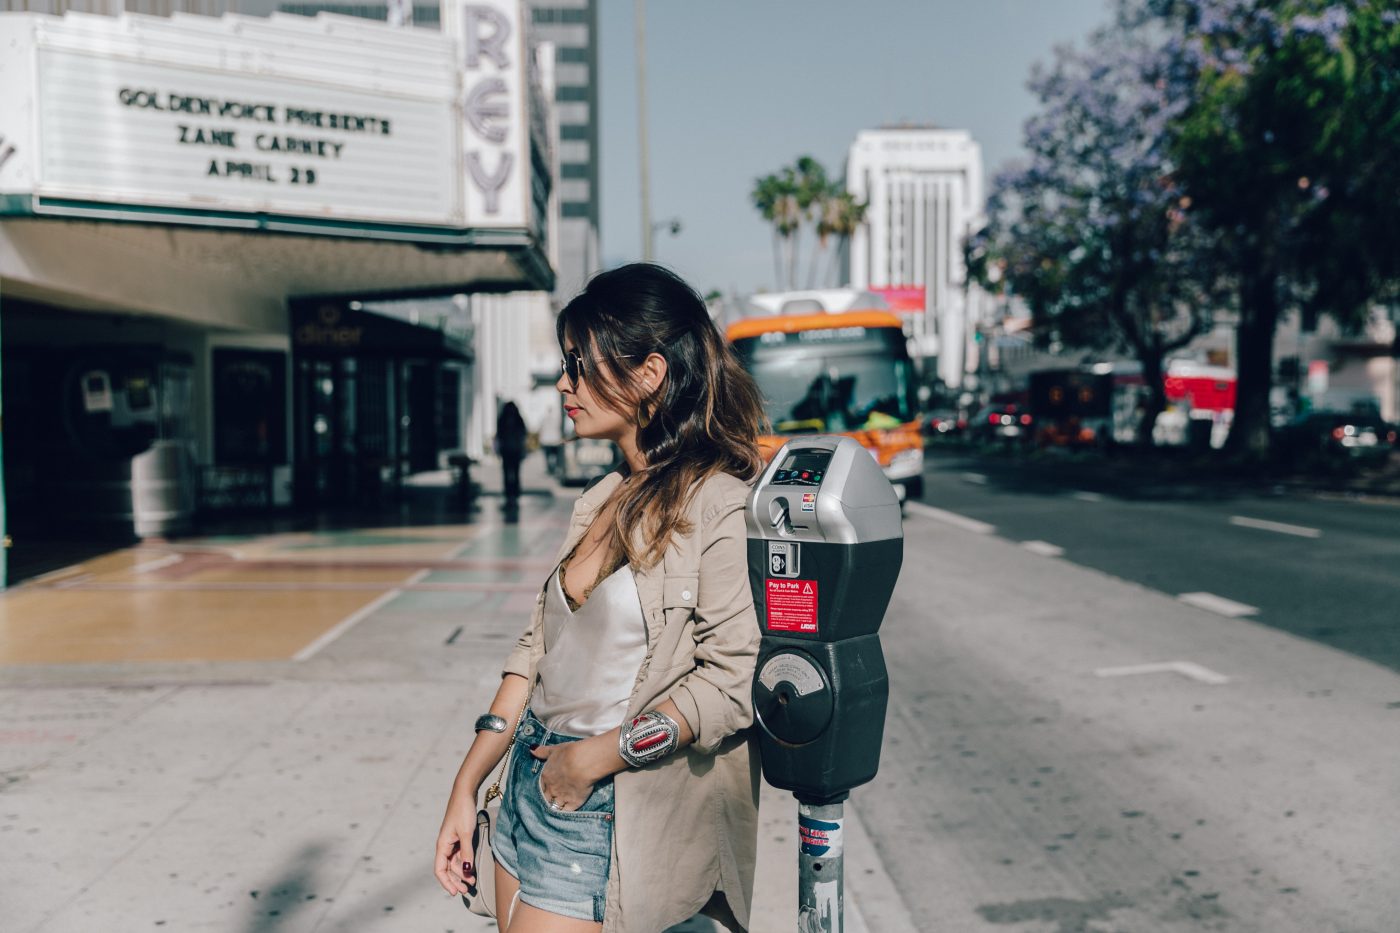 Levis_Shirt-GRLFRND_Denim-Chloe_Bag-Los_Angeles-Shorts-Outfit-Street_Style-Ray_Ban-Street_Style-Collage_Vintage-11